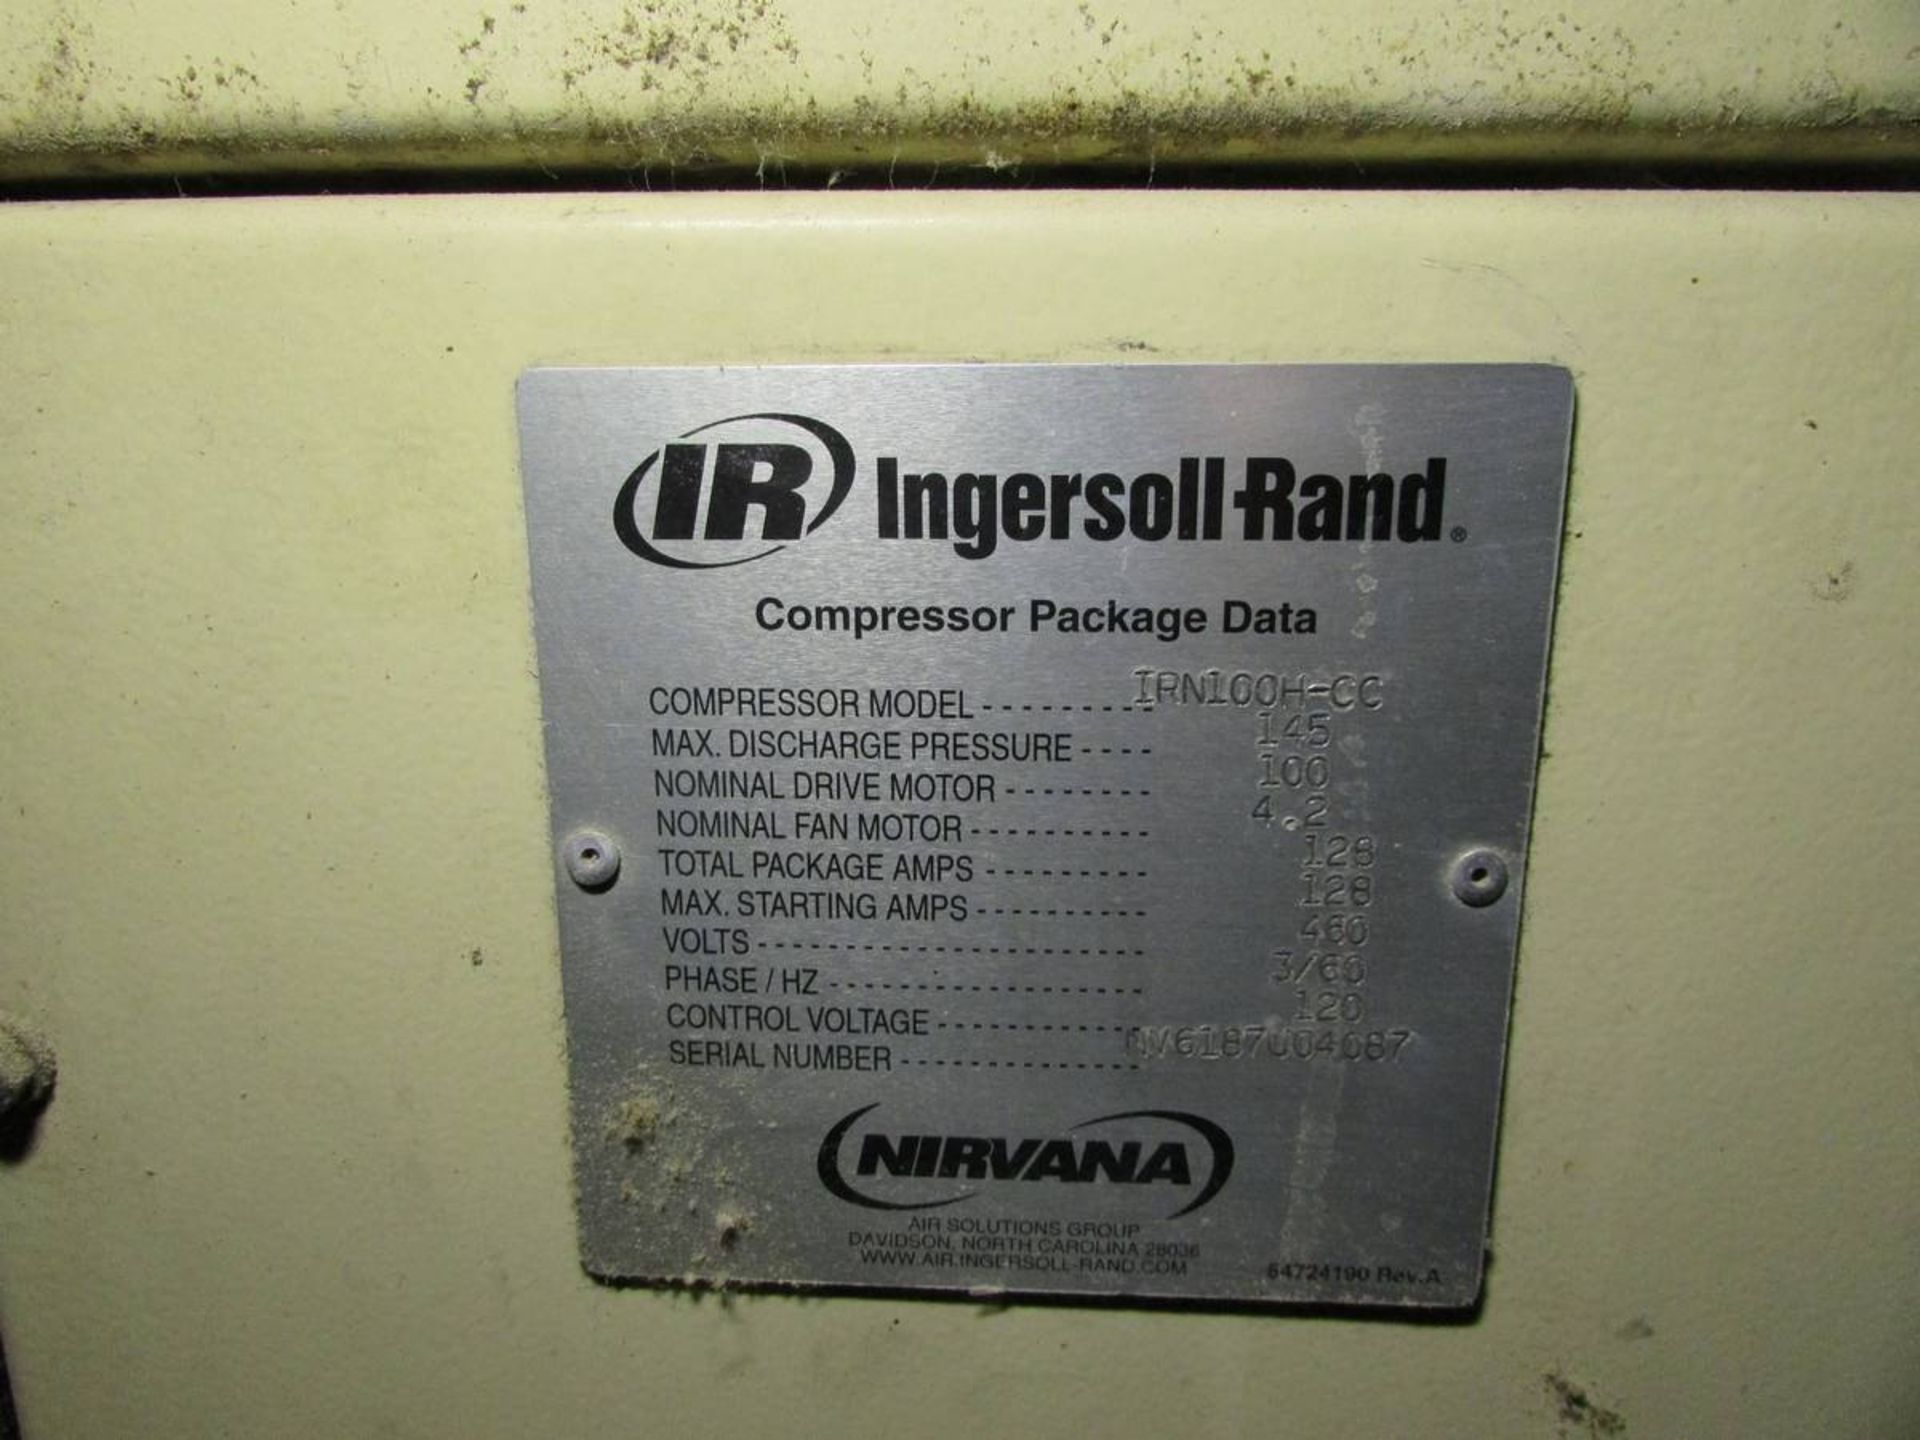 Ingersoll-Rand IRN100H-CC 100 HP Rotary Screw Air Compressor - Image 8 of 8